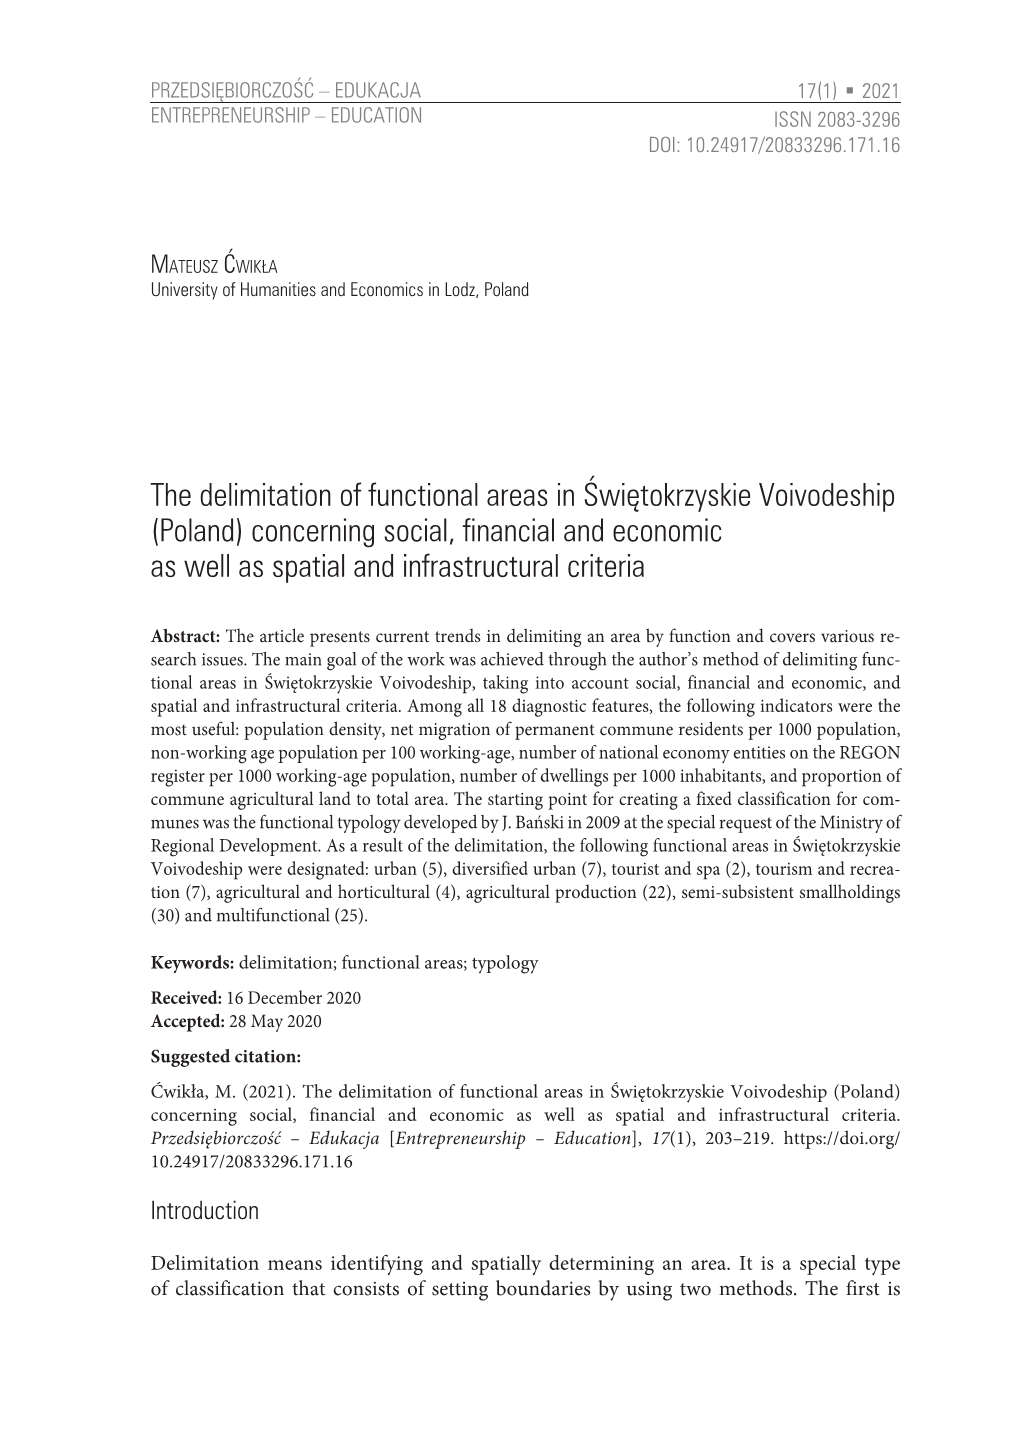 The Delimitation of Functional Areas in Świętokrzyskie Voivodeship (Poland) Concerning Social, Financial and Economic As Well As Spatial and Infrastructural Criteria